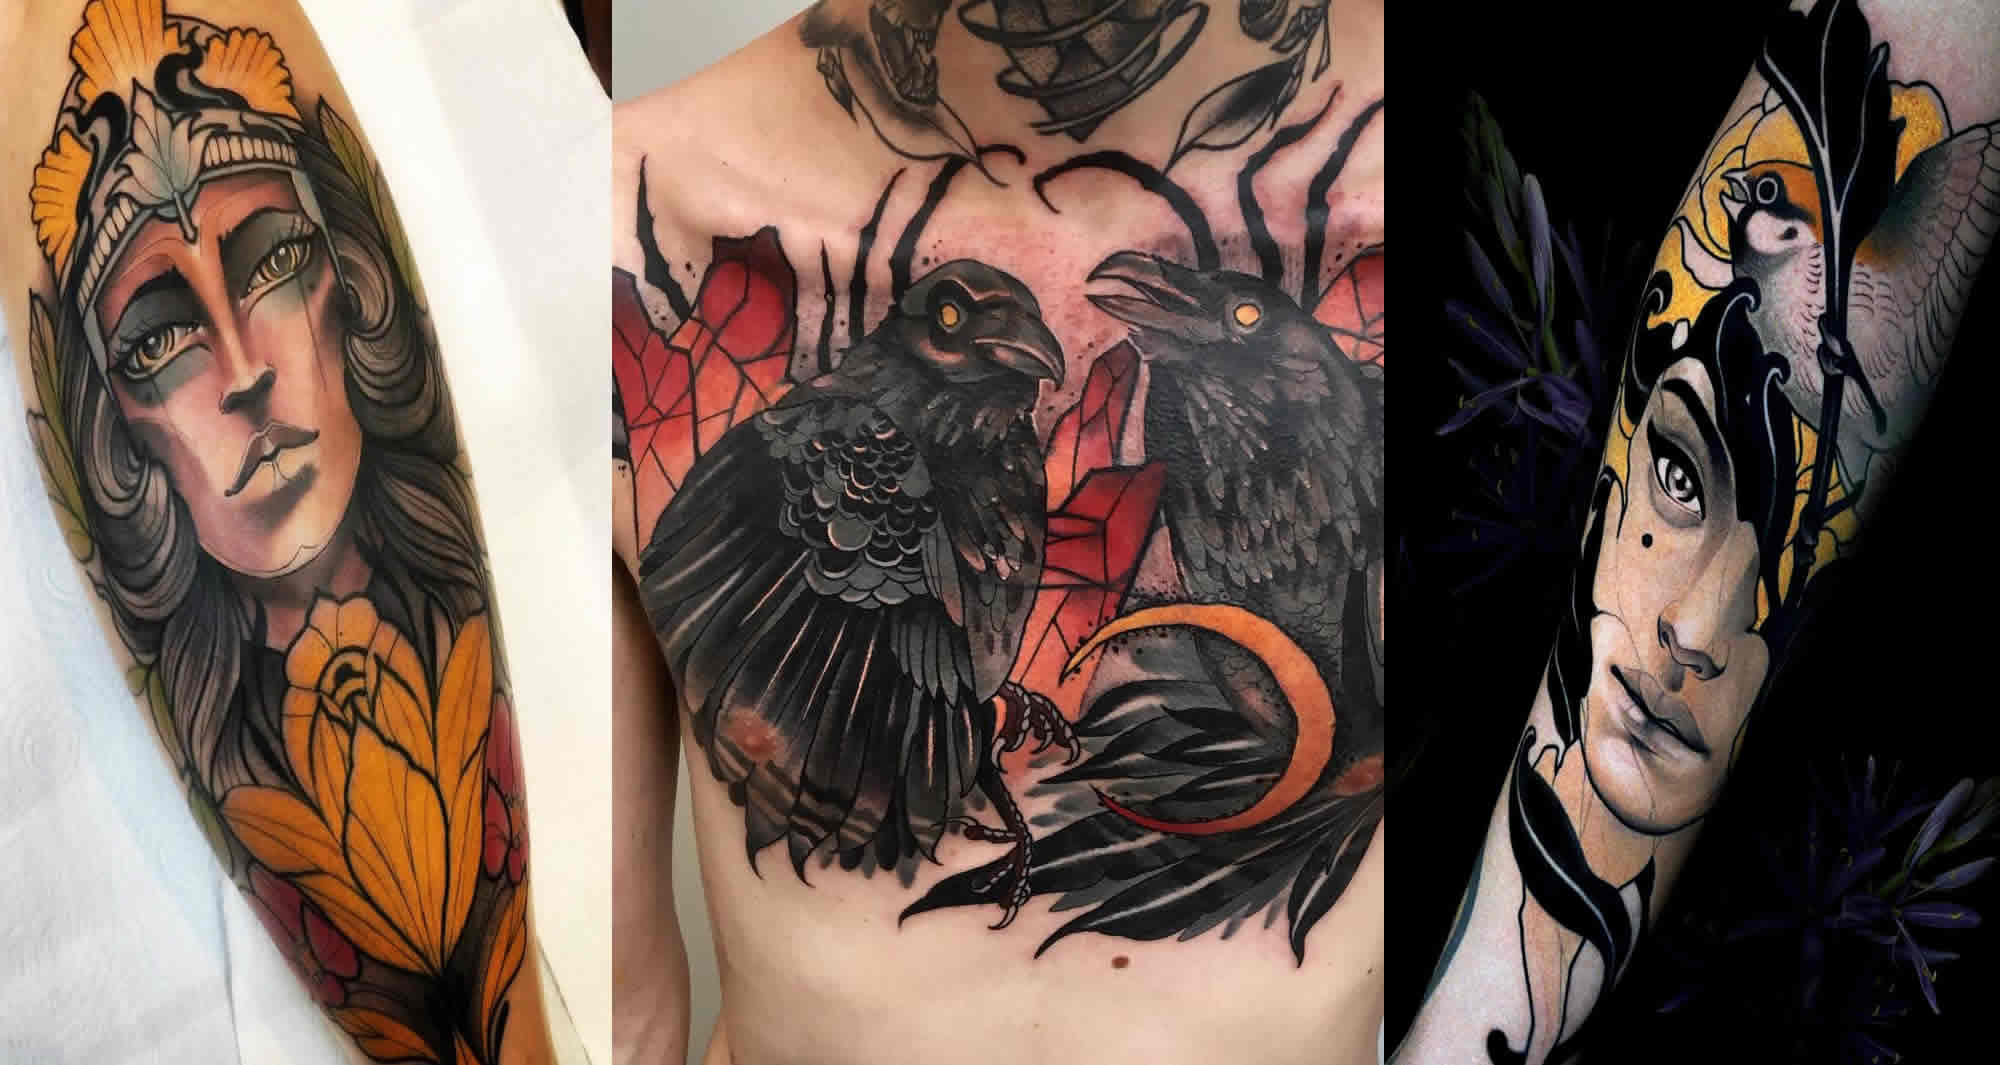 cover the rise of neo traditional tattoos combining traditional and modern elements